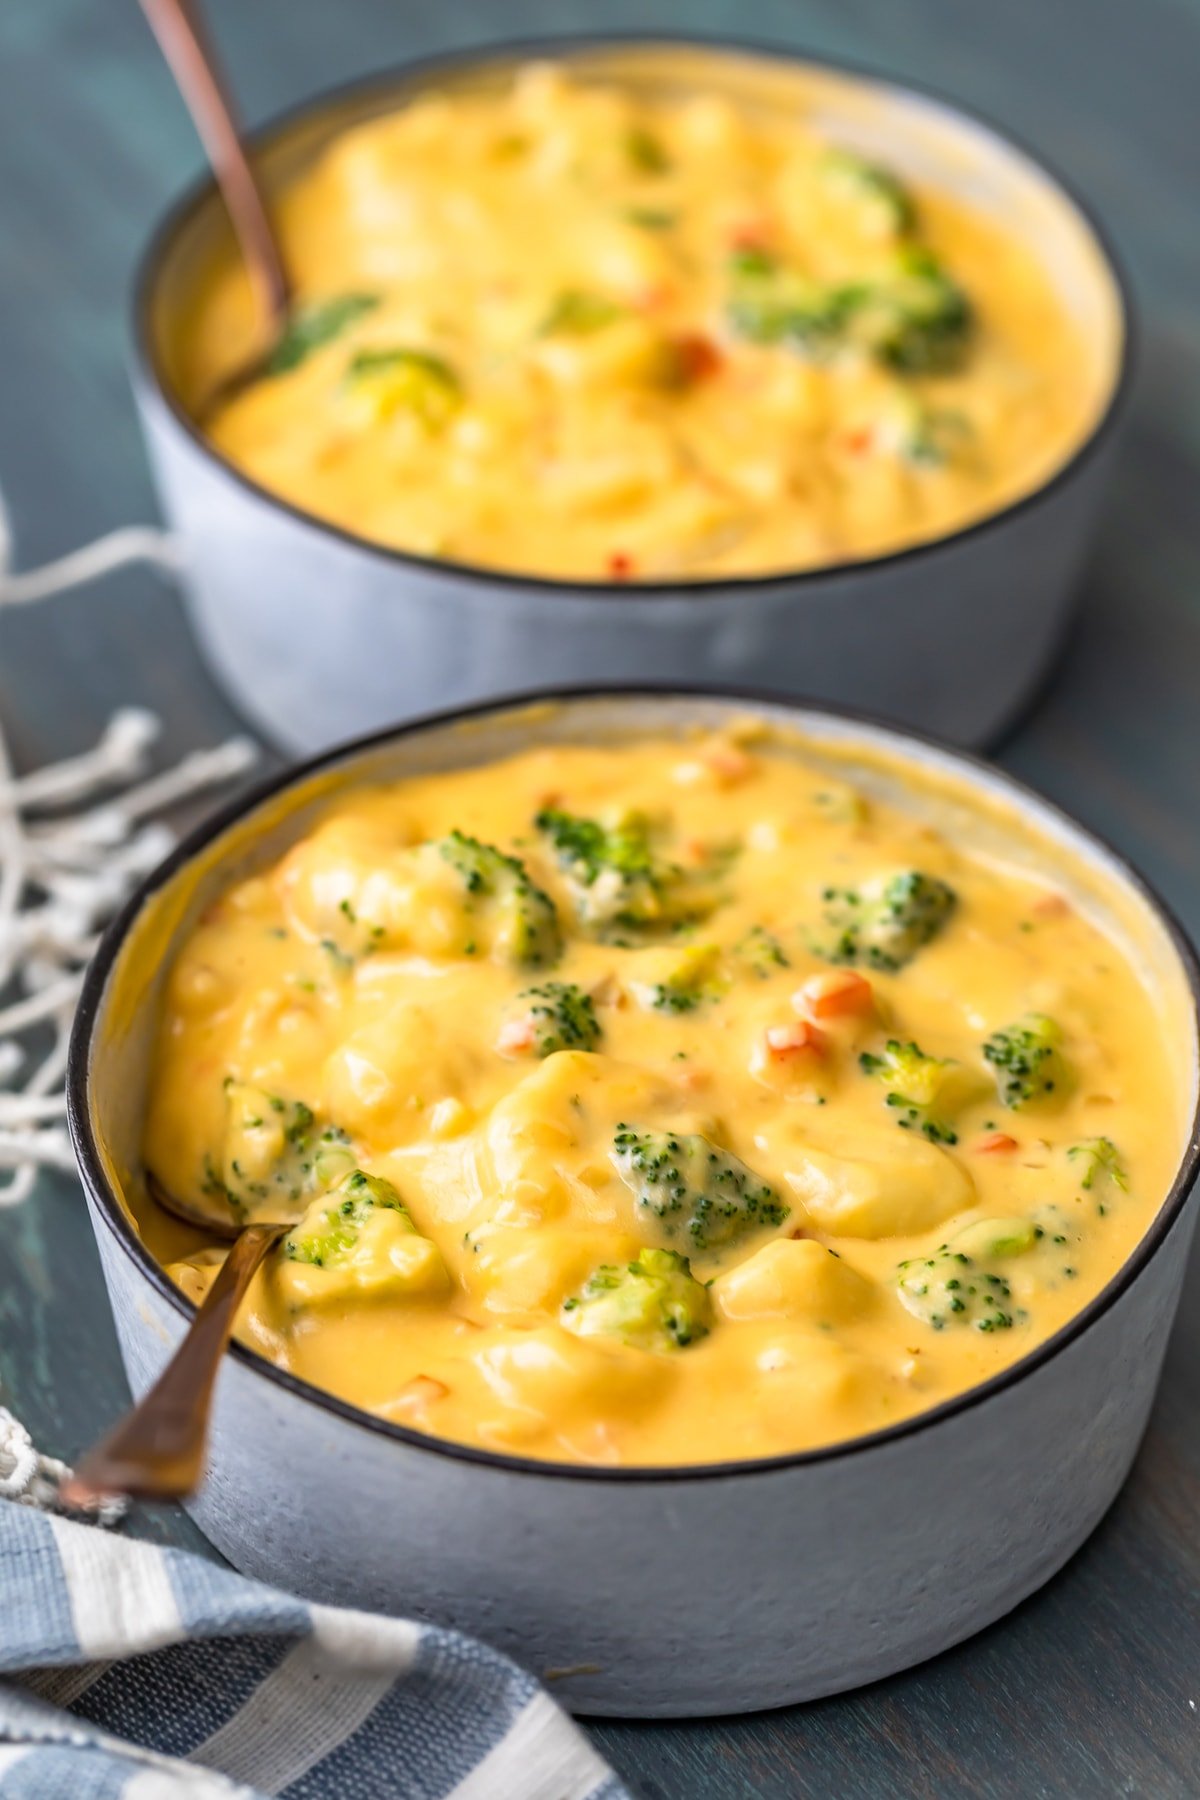 two bowls of broccoli and cheese soup with gnocchi